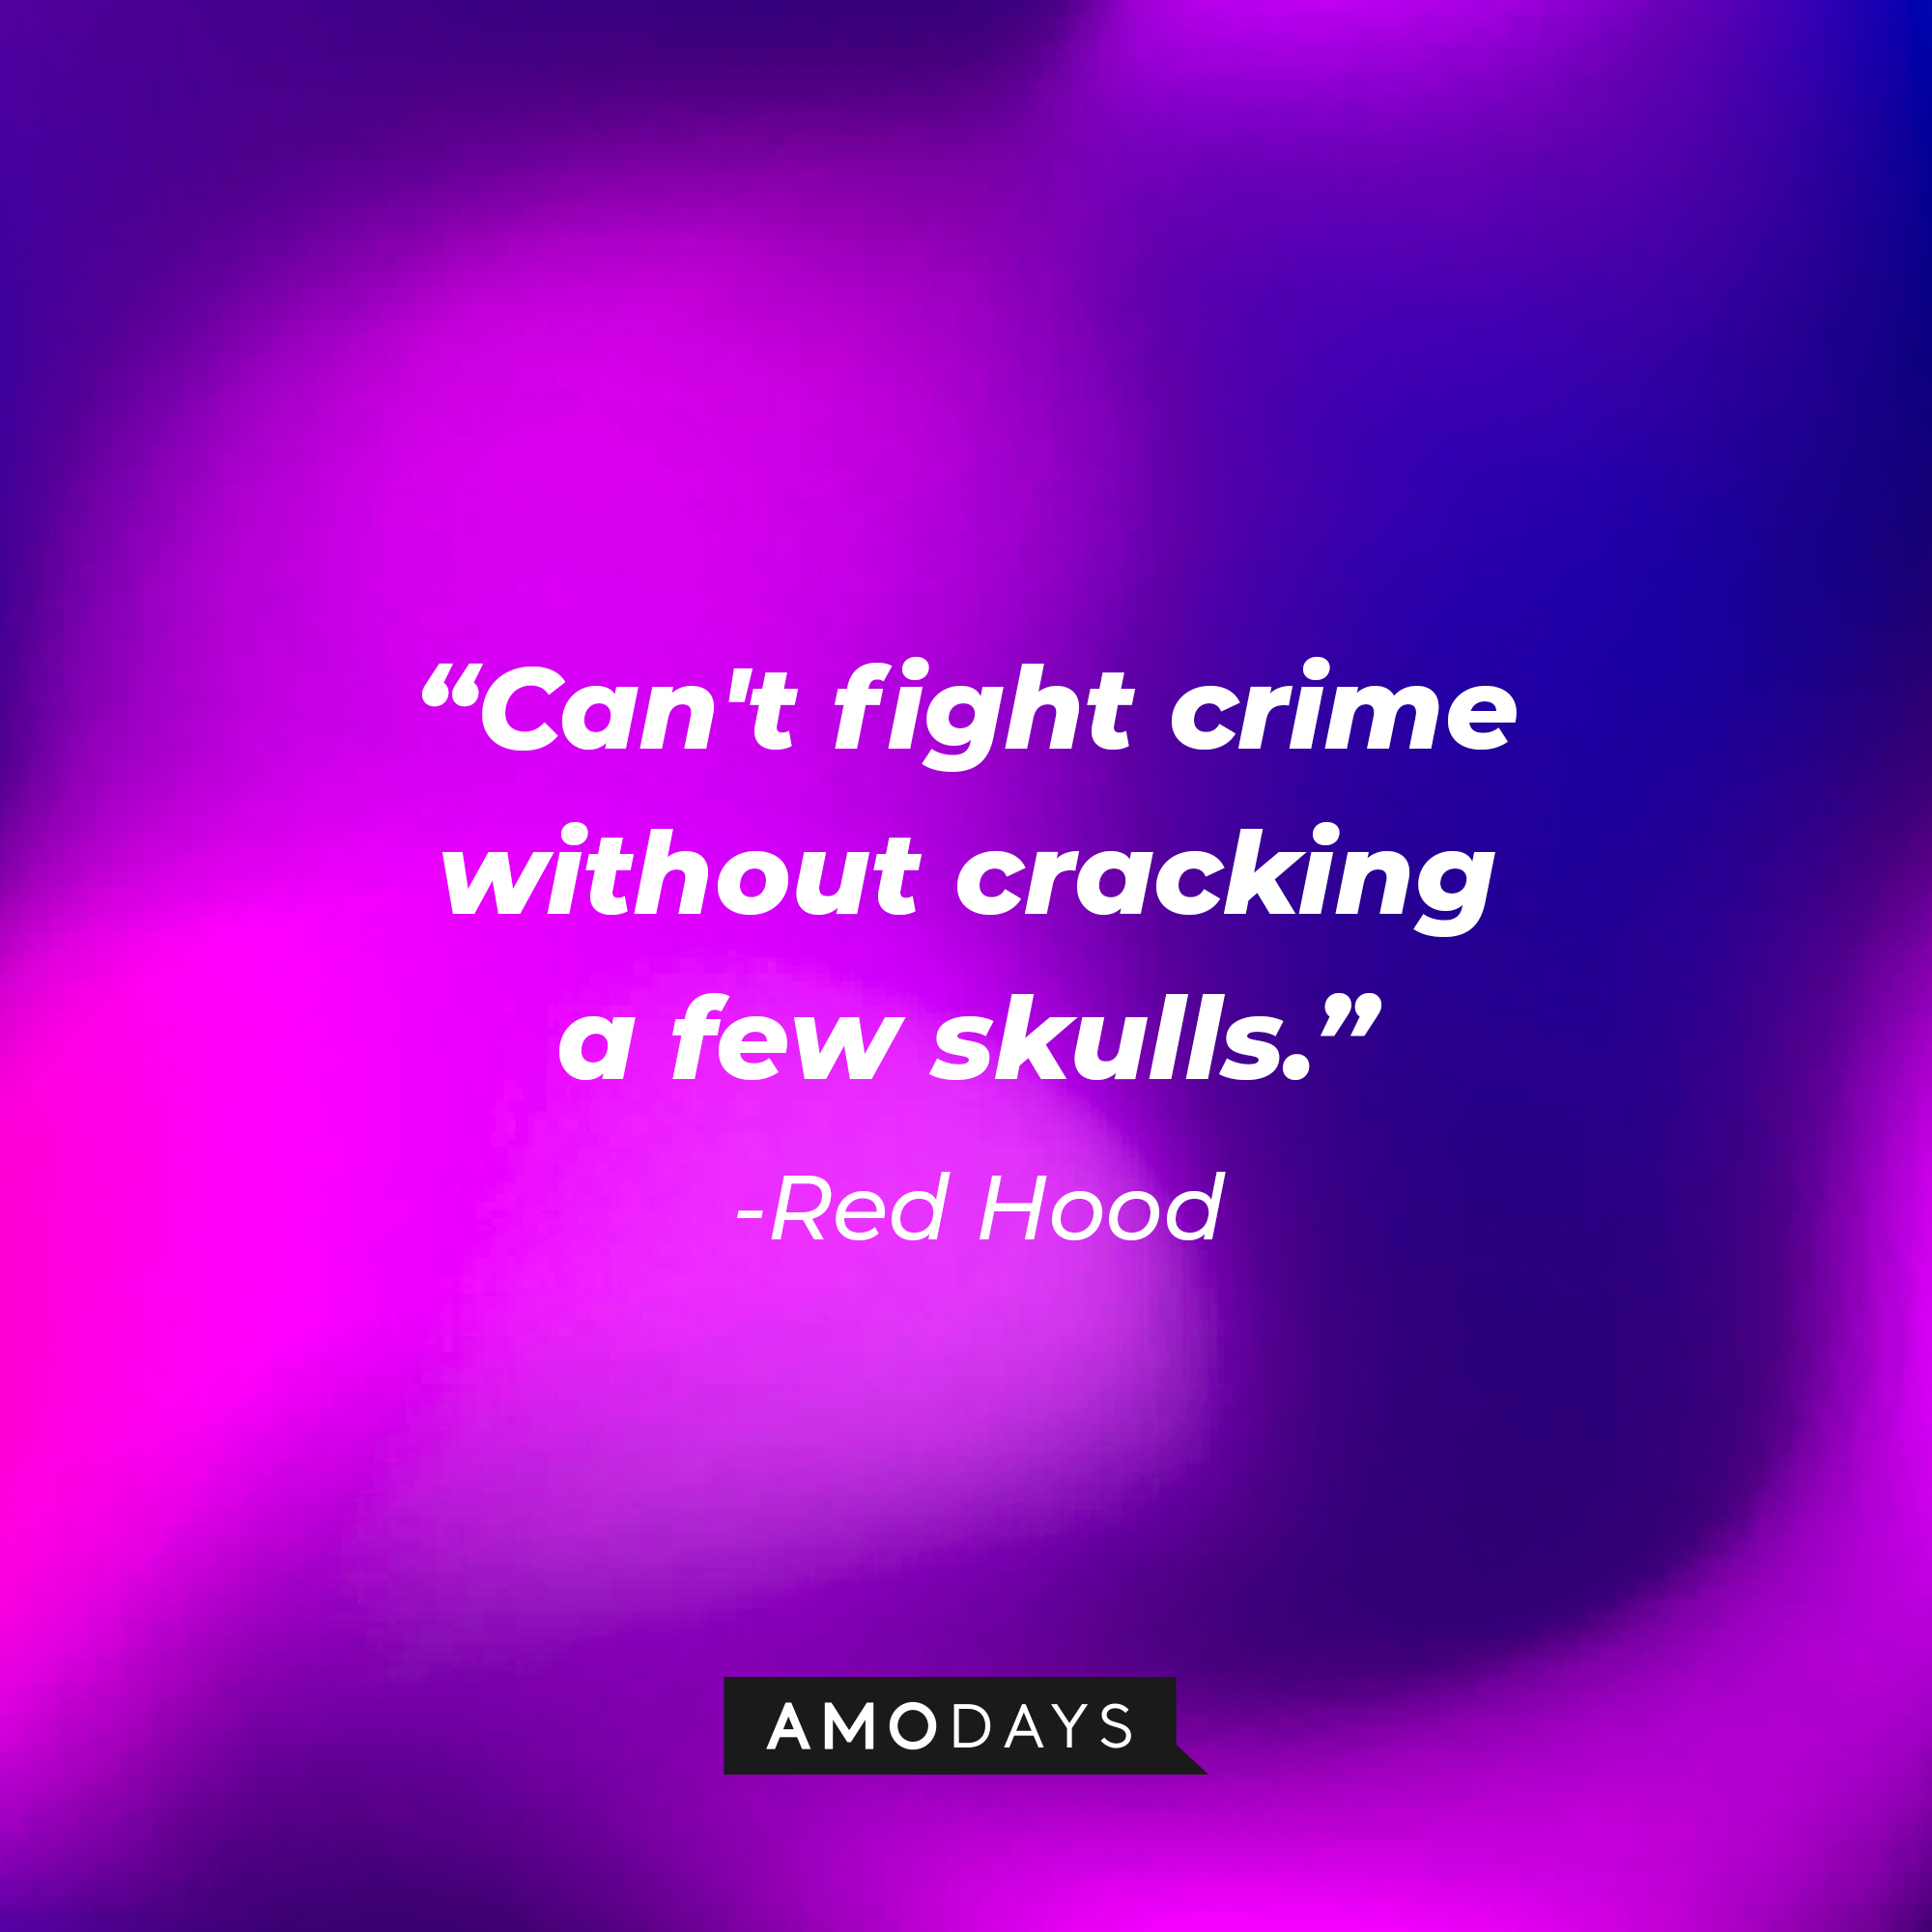 Red Hood’s quote: "Can't fight crime without cracking a few skulls." | Source: AmoDays